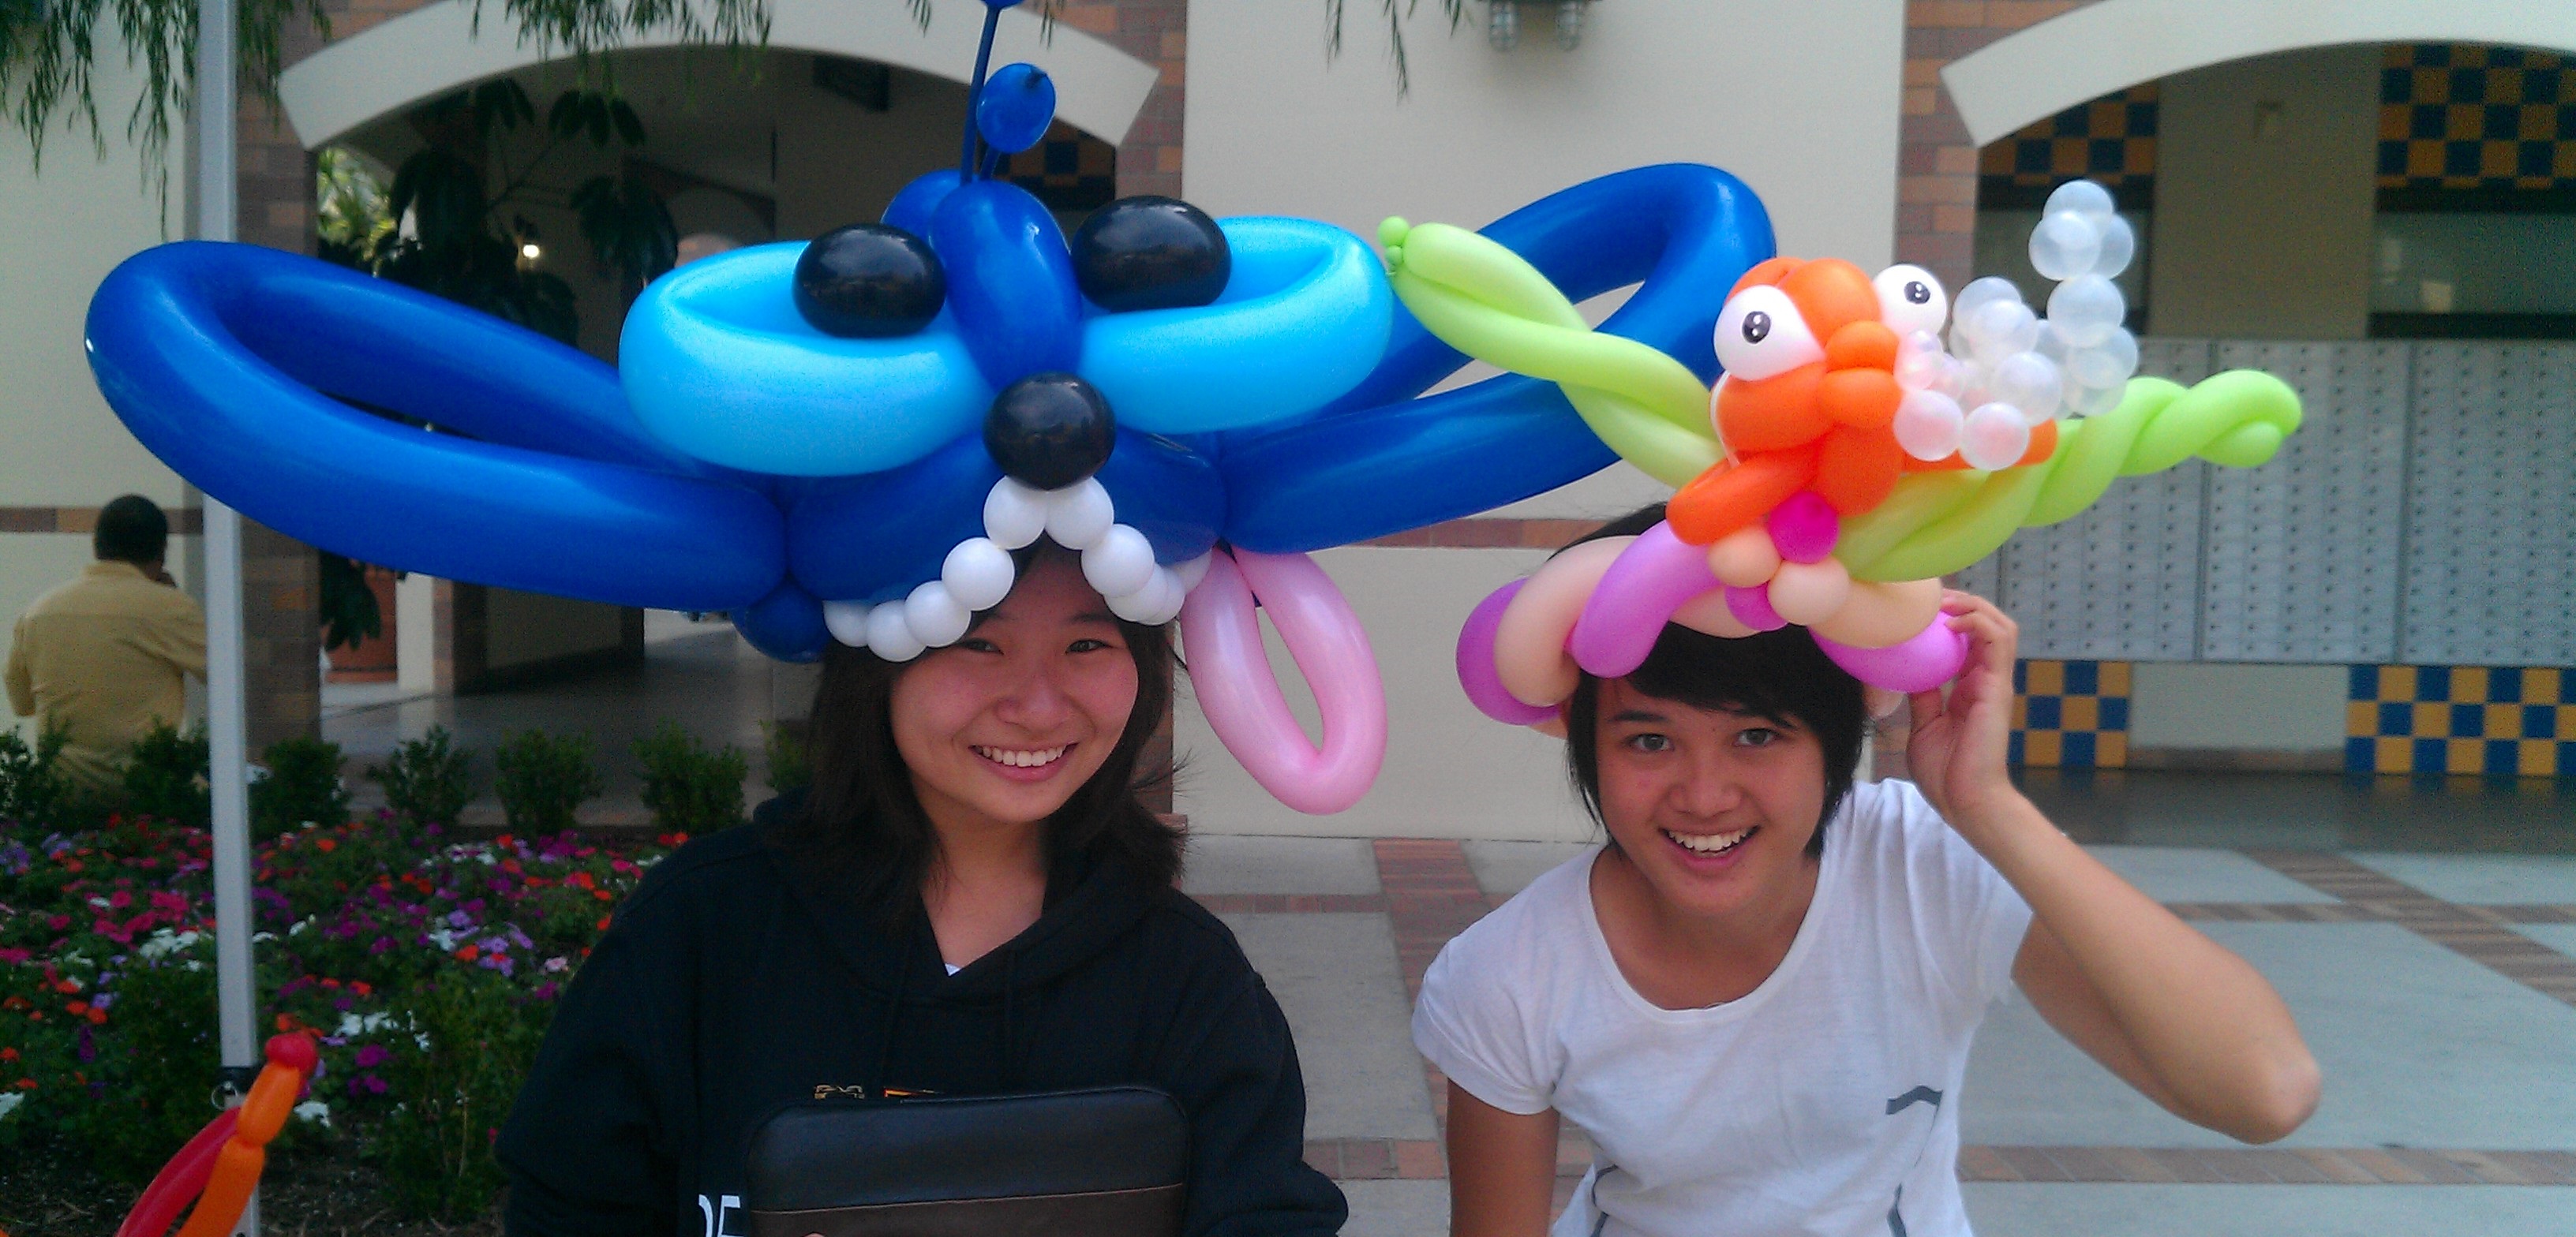 Placentia balloon animals for parties